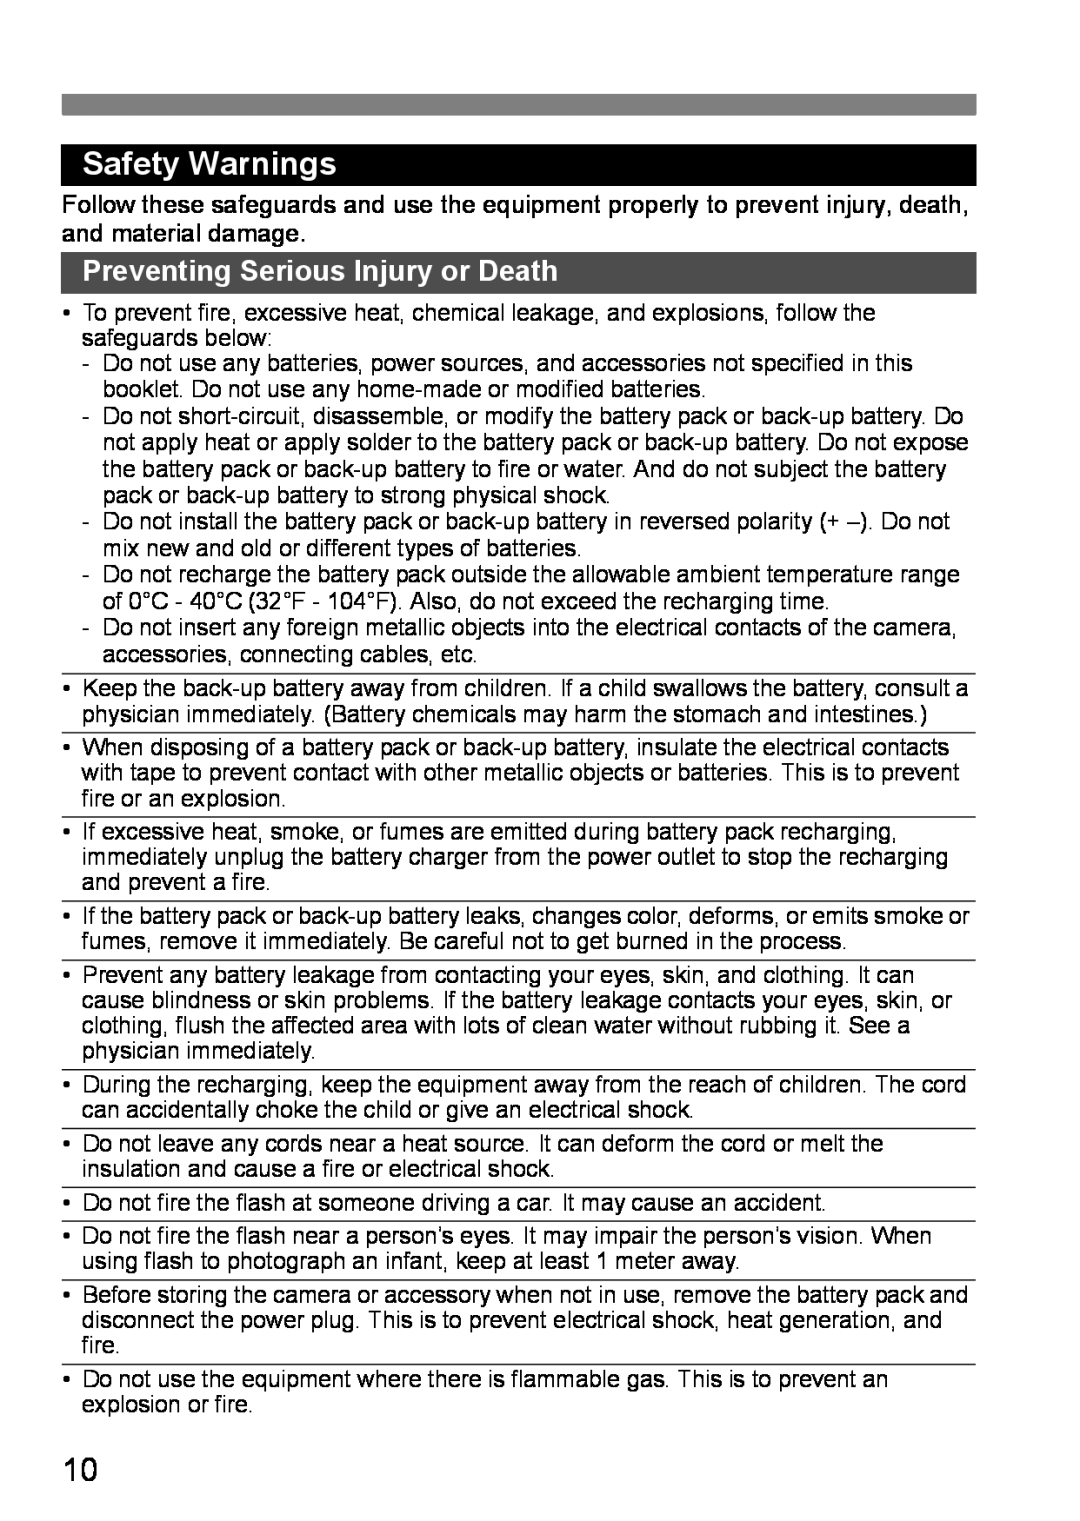 Canon EOS DIGITAL REBEL XTI instruction manual Safety Warnings, Preventing Serious Injury or Death 